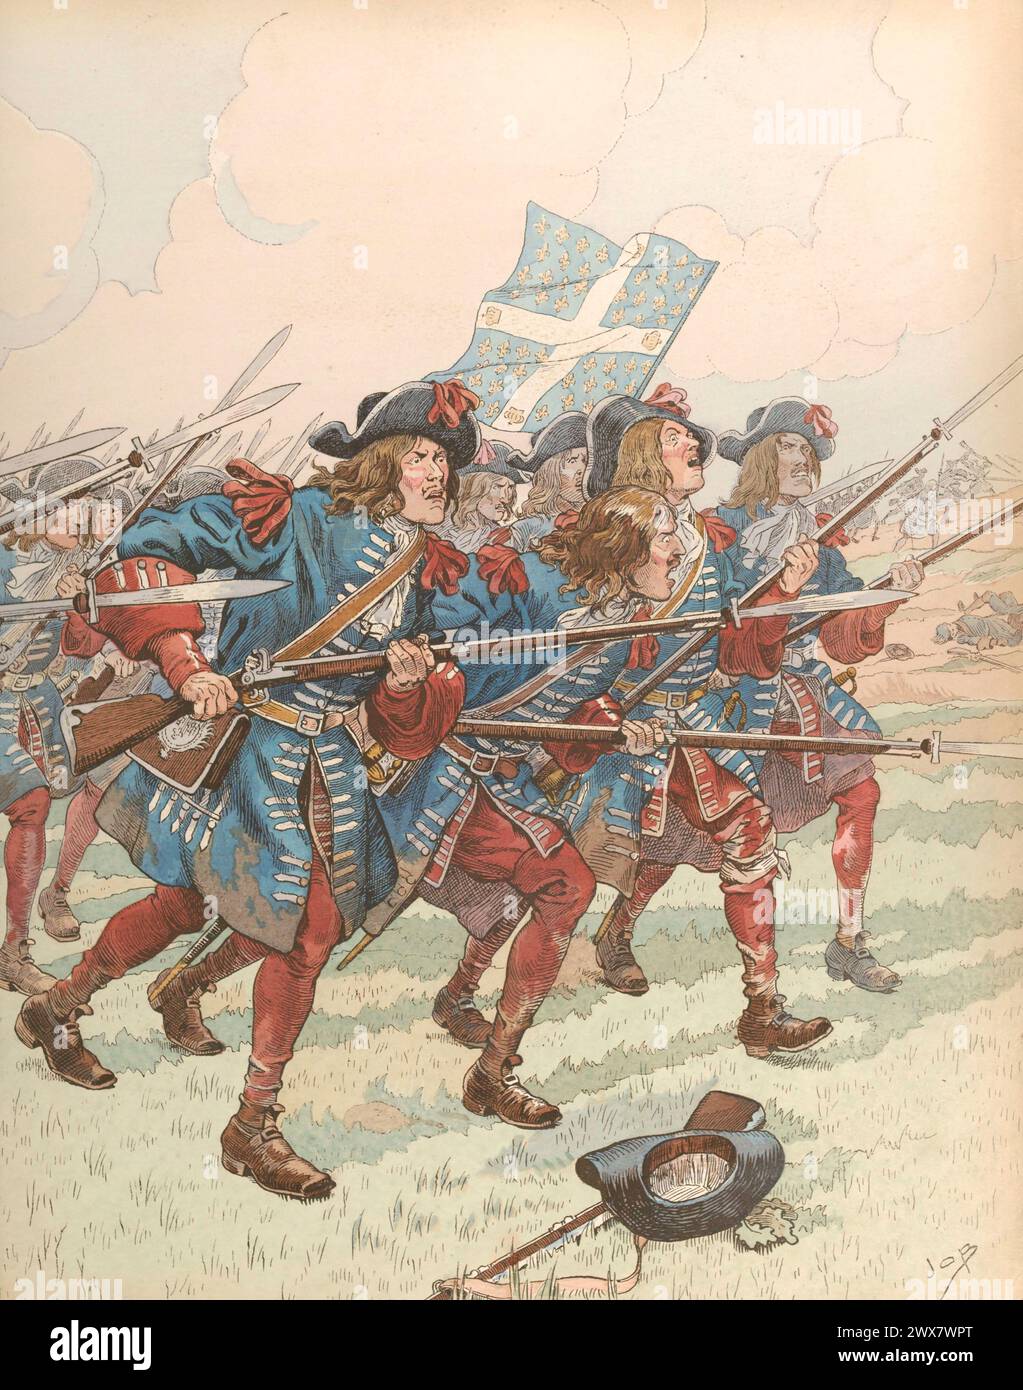 Use of the first bayonets by French soldiers of the Royal Artillery Regiment in 1671.  Illustration by Job published in the book 'Allons, Enfants de la Patrie !...' by Jean Richepin. Published by A. Mame et fils in 1920. Stock Photo